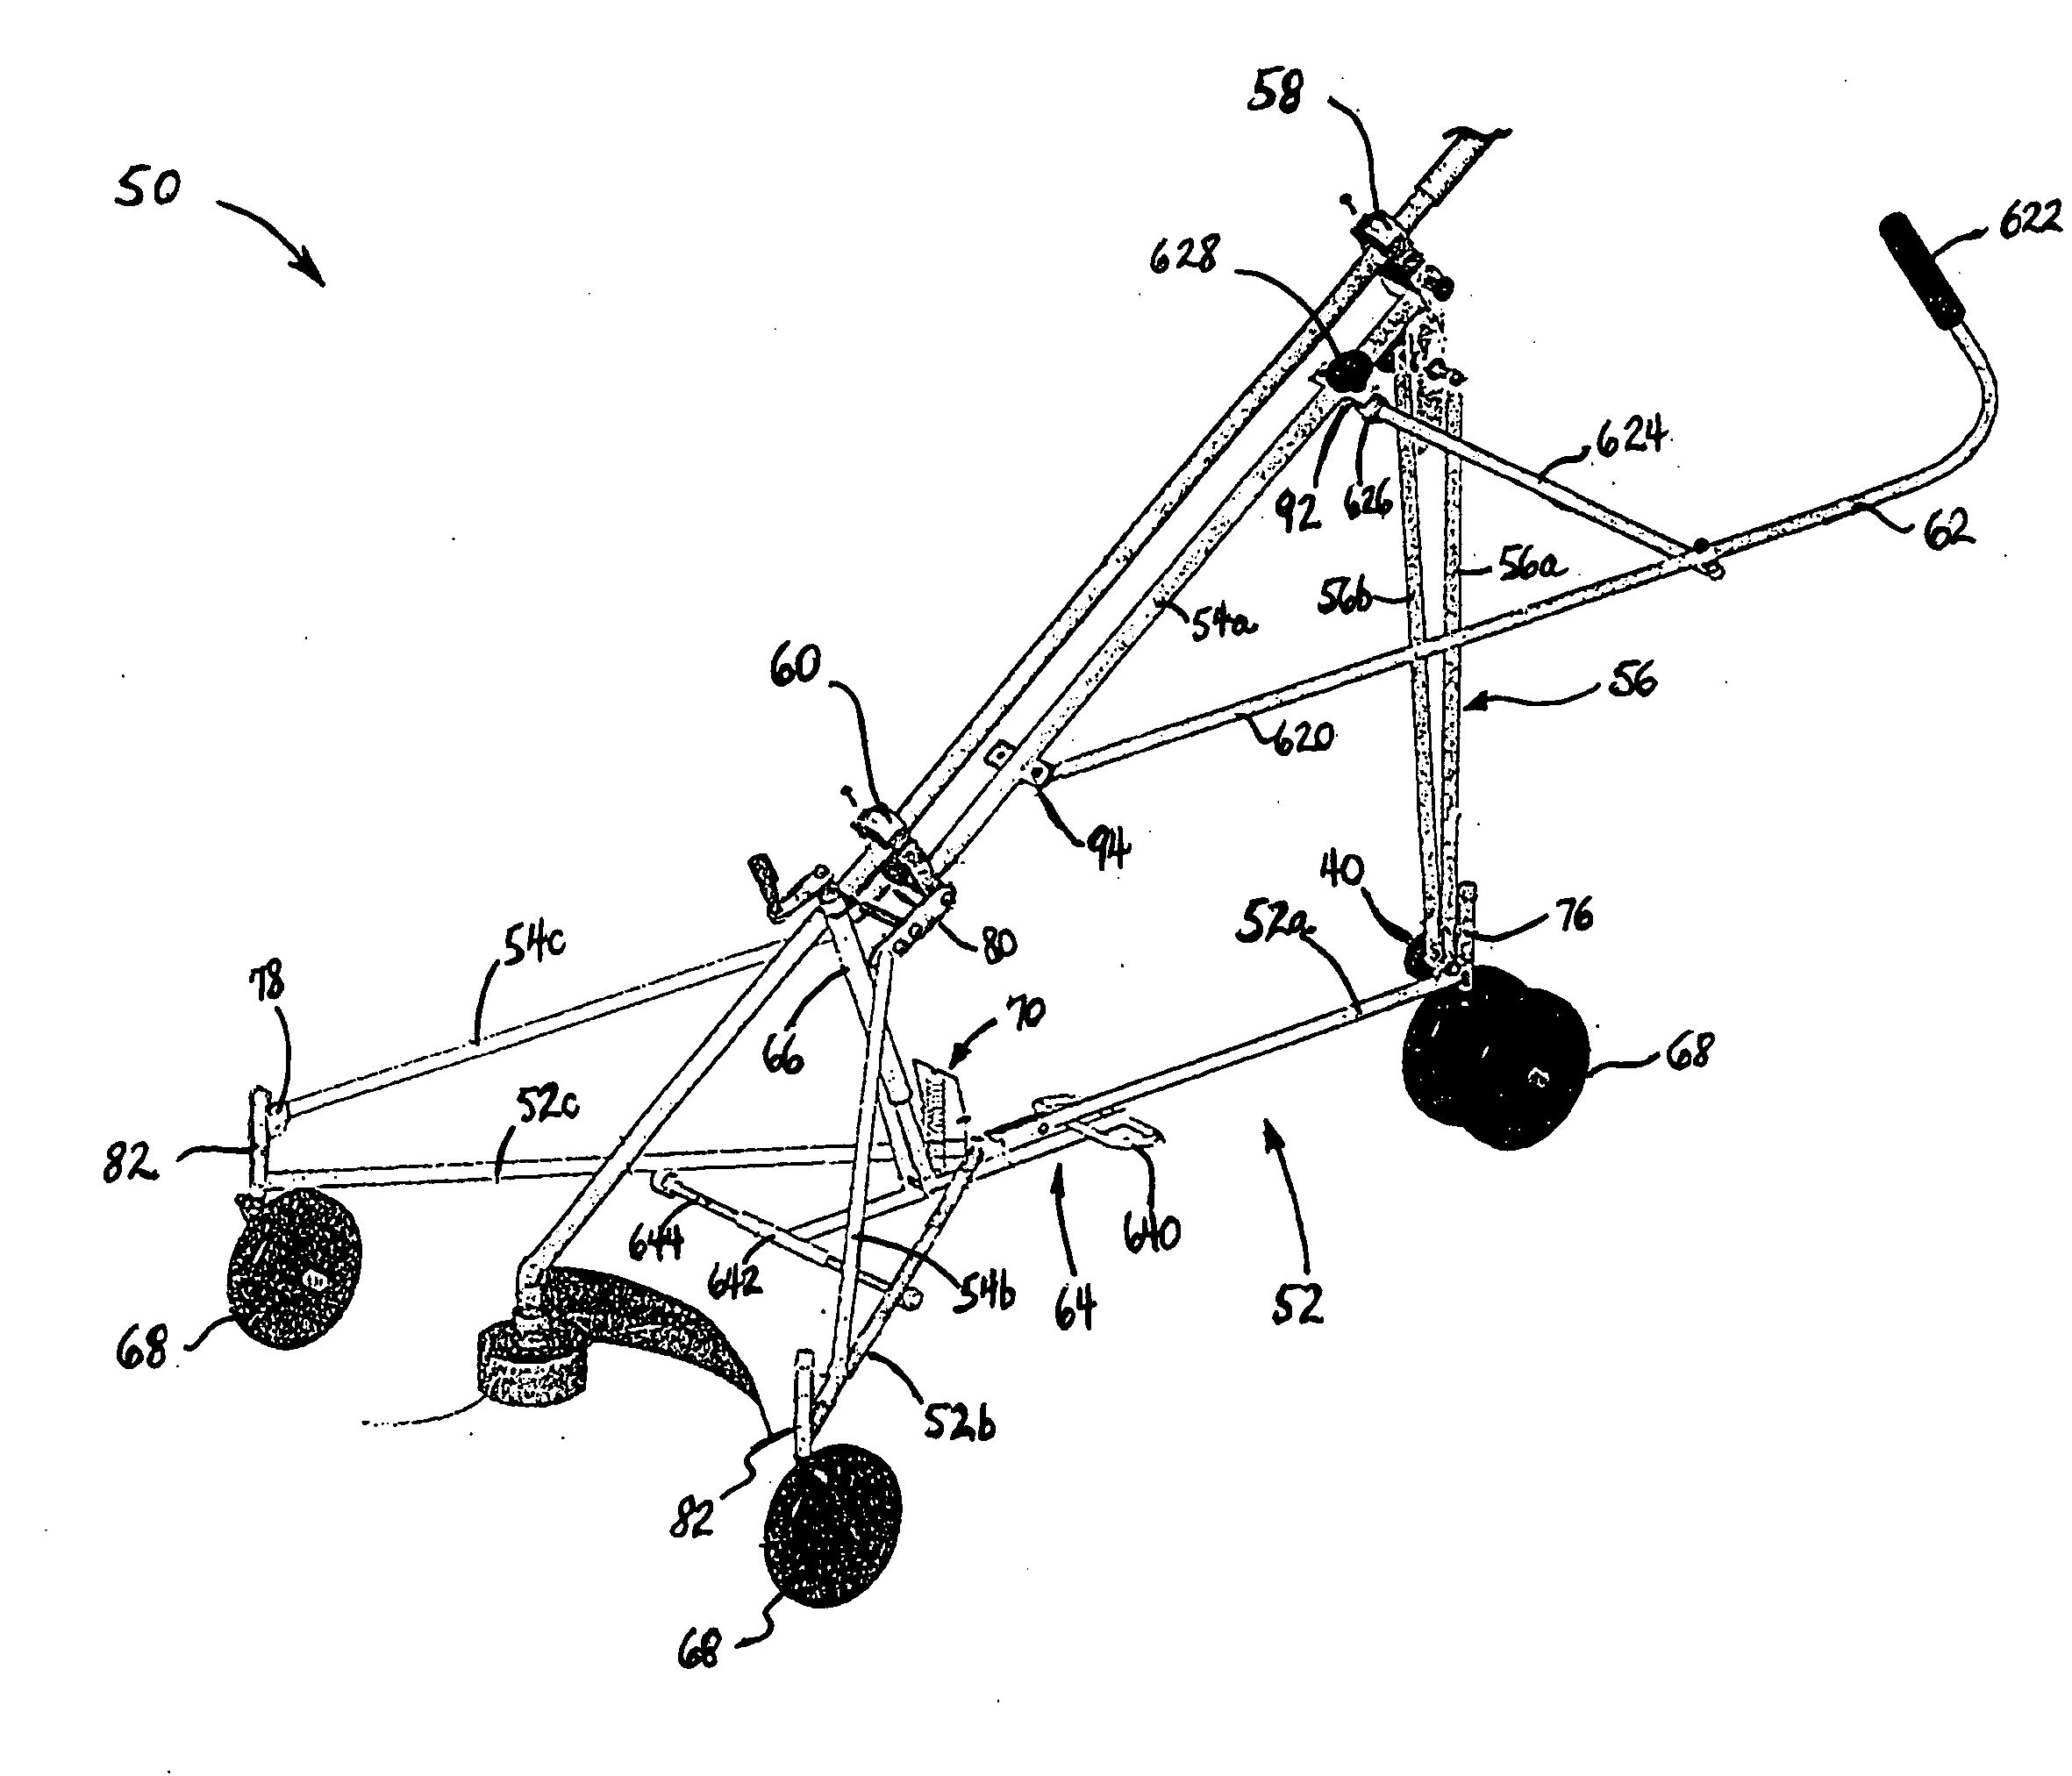 Mobile carriage supporting a tool or implement